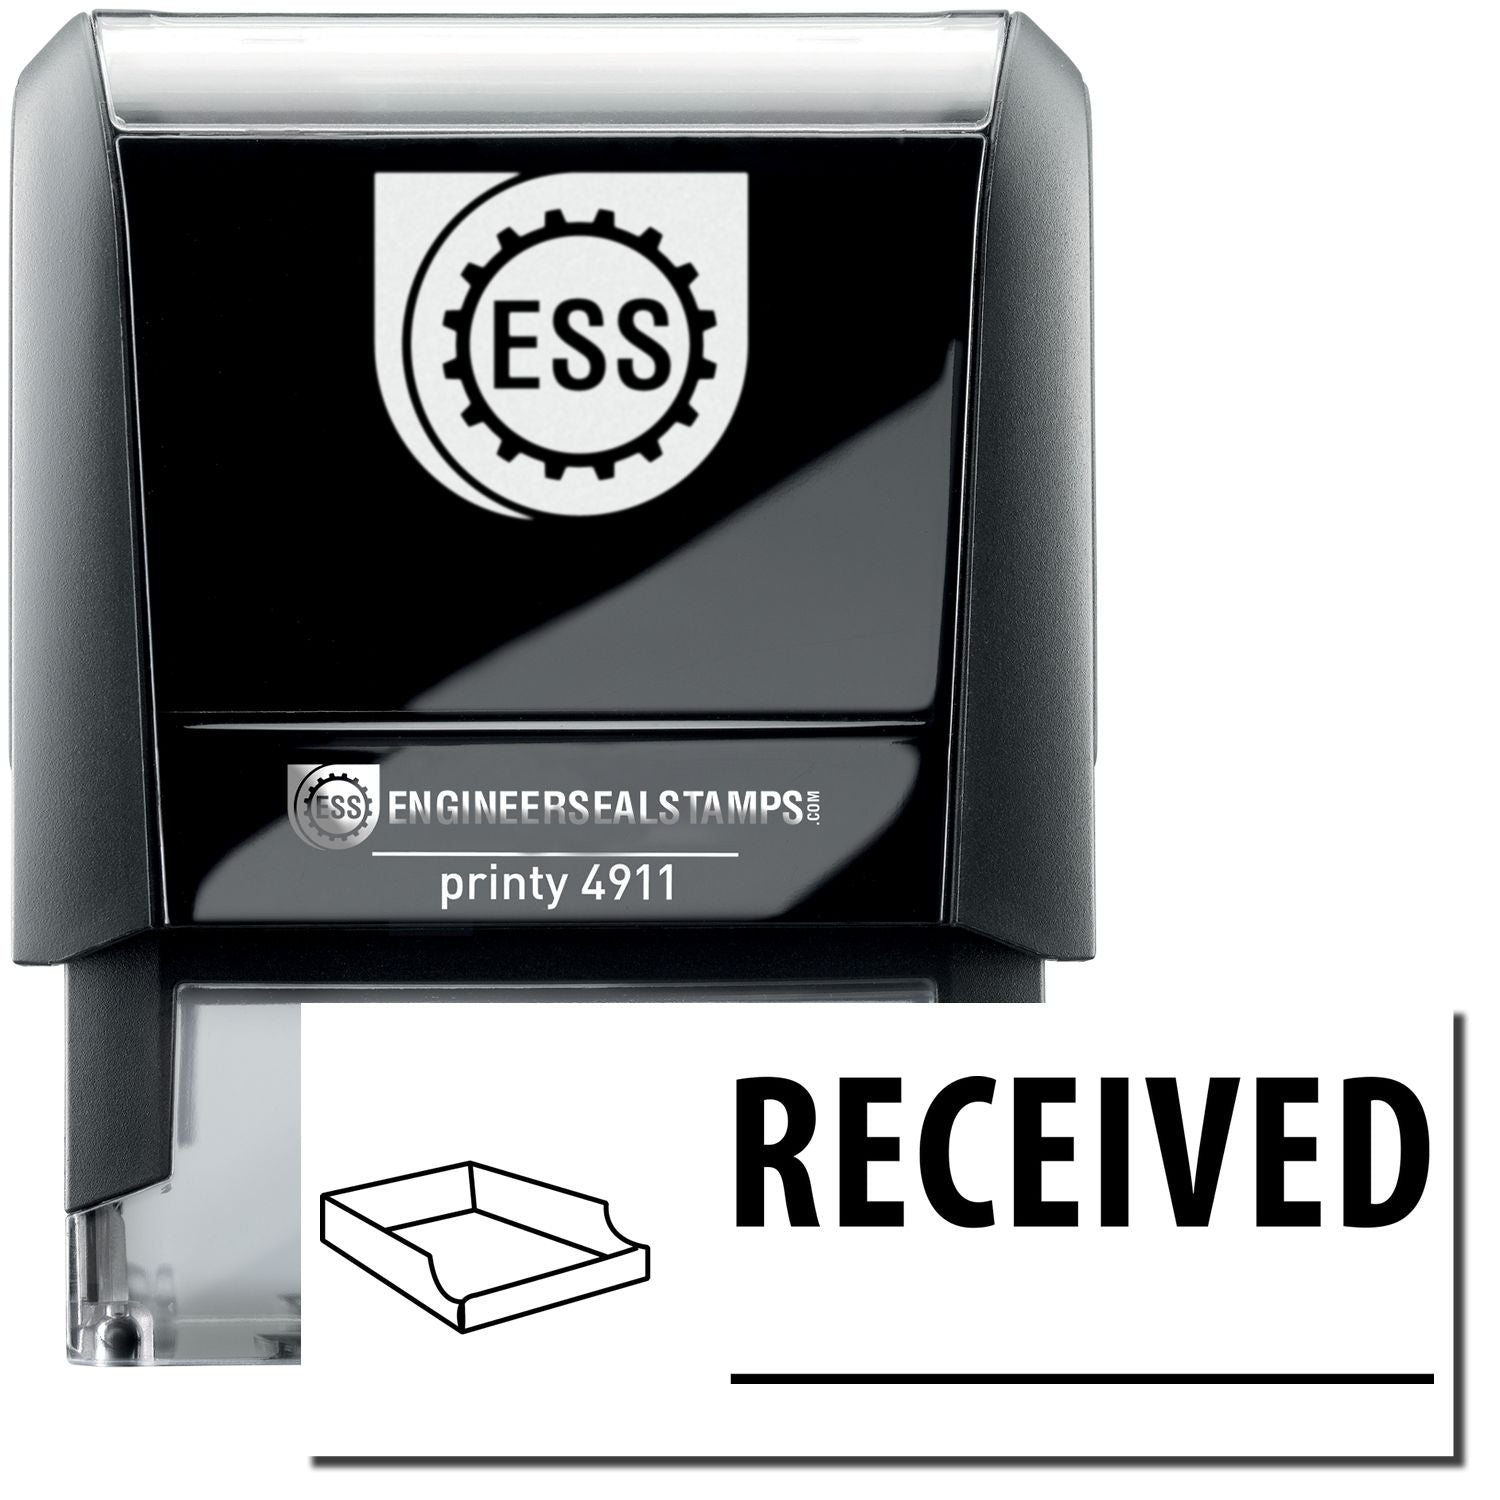 A self-inking stamp with a stamped image showing how the text "RECEIVED" with a line underneath the text and an inbox icon on the left side is displayed after stamping.